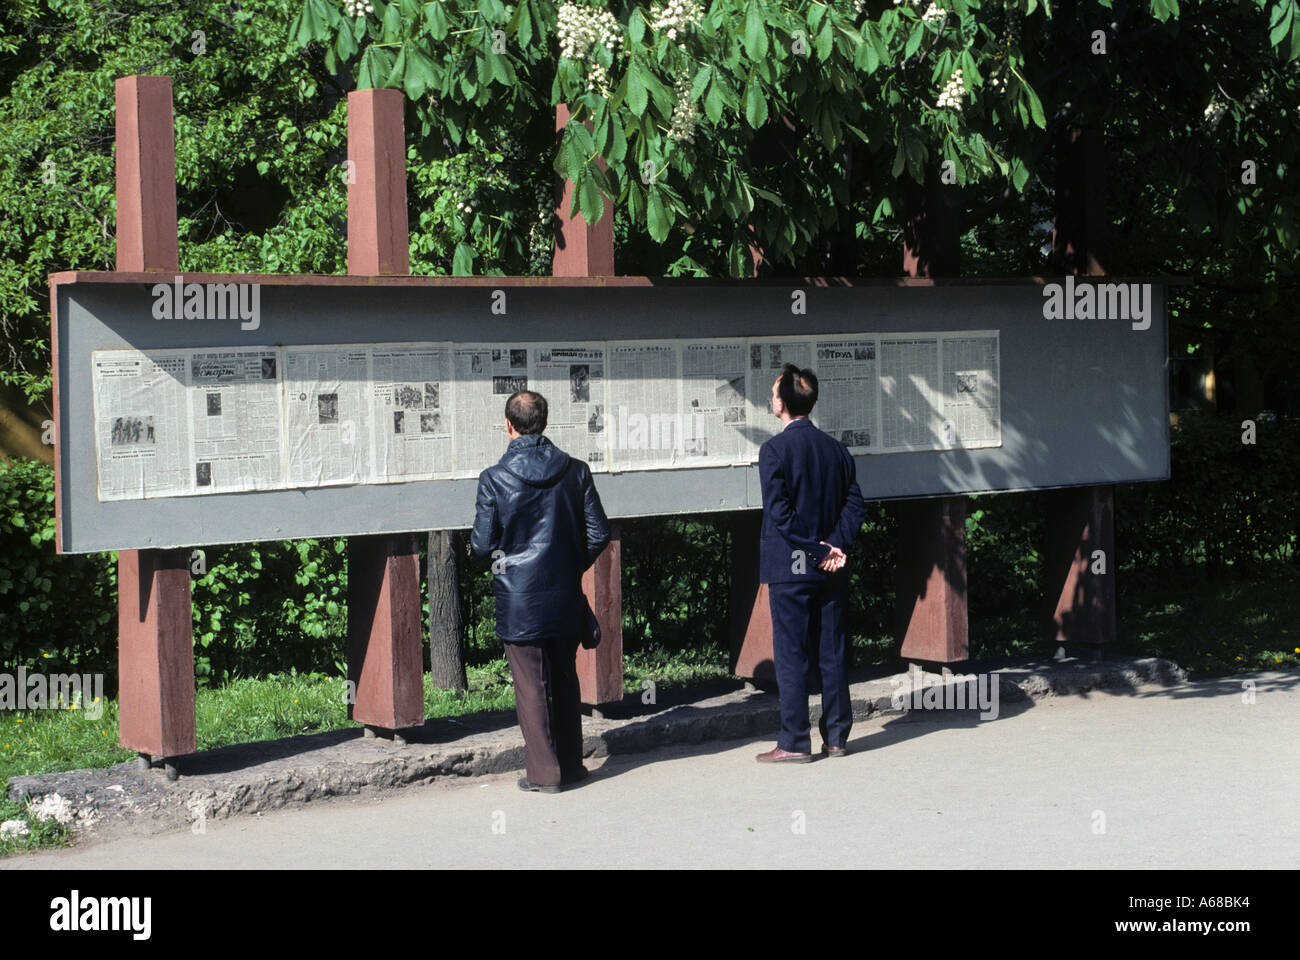 Russian men reading the day's edition of Pravda on a public display board, early 1990s before the collapse of the Soviet Union Stock Photo